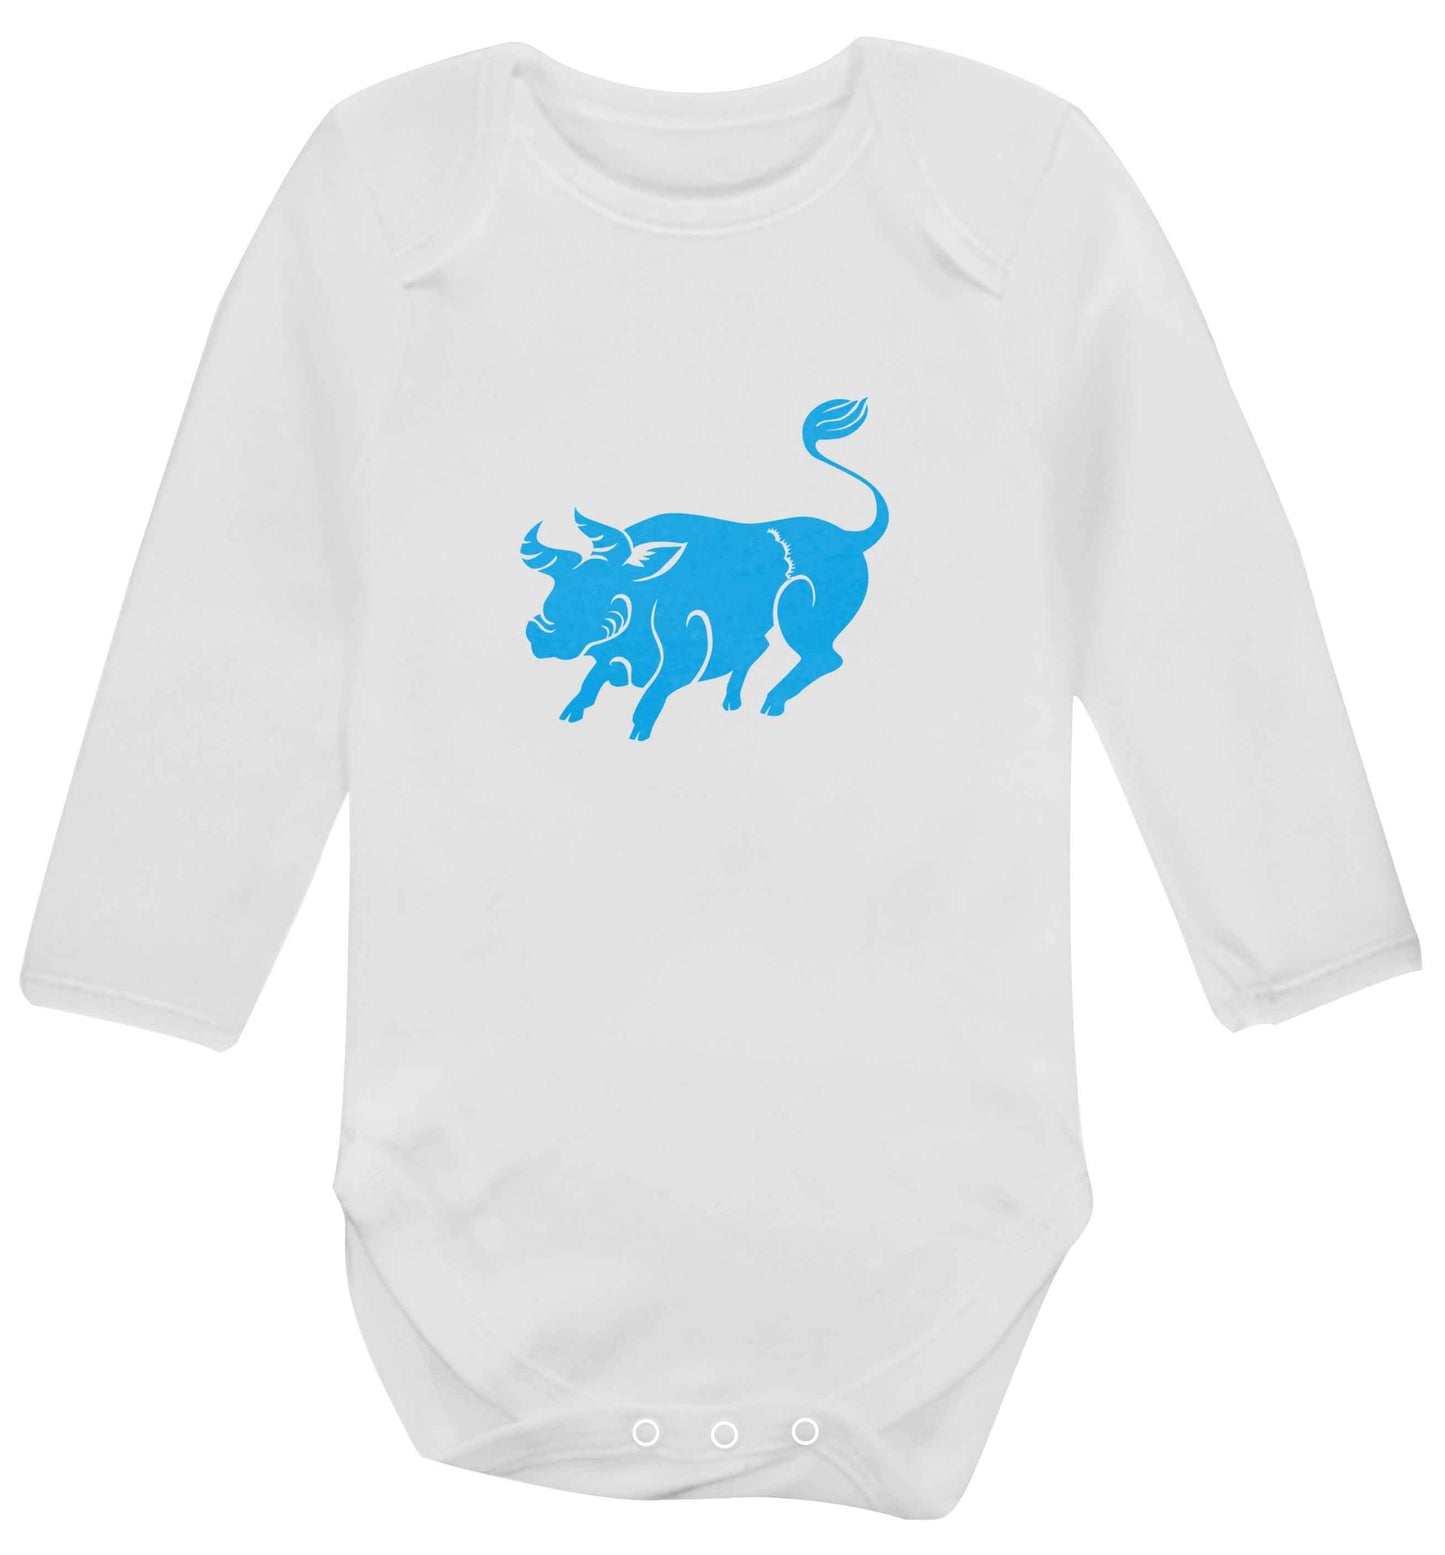 Blue ox baby vest long sleeved white 6-12 months